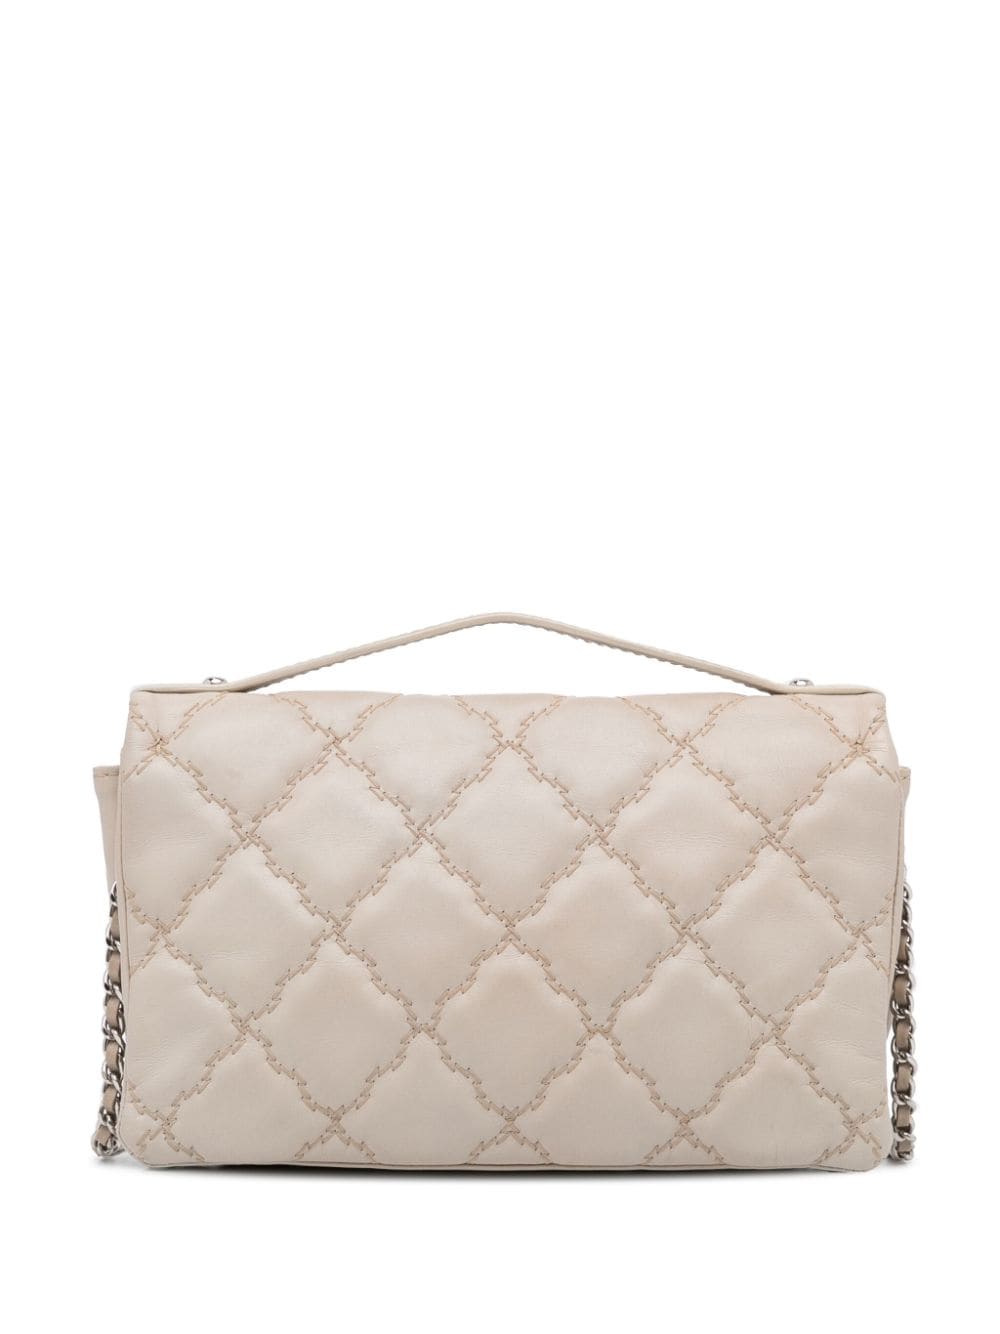 CHANEL Pre-Owned 2004-2005 mini double diamond-quilted Hamptons two-way bag - Beige